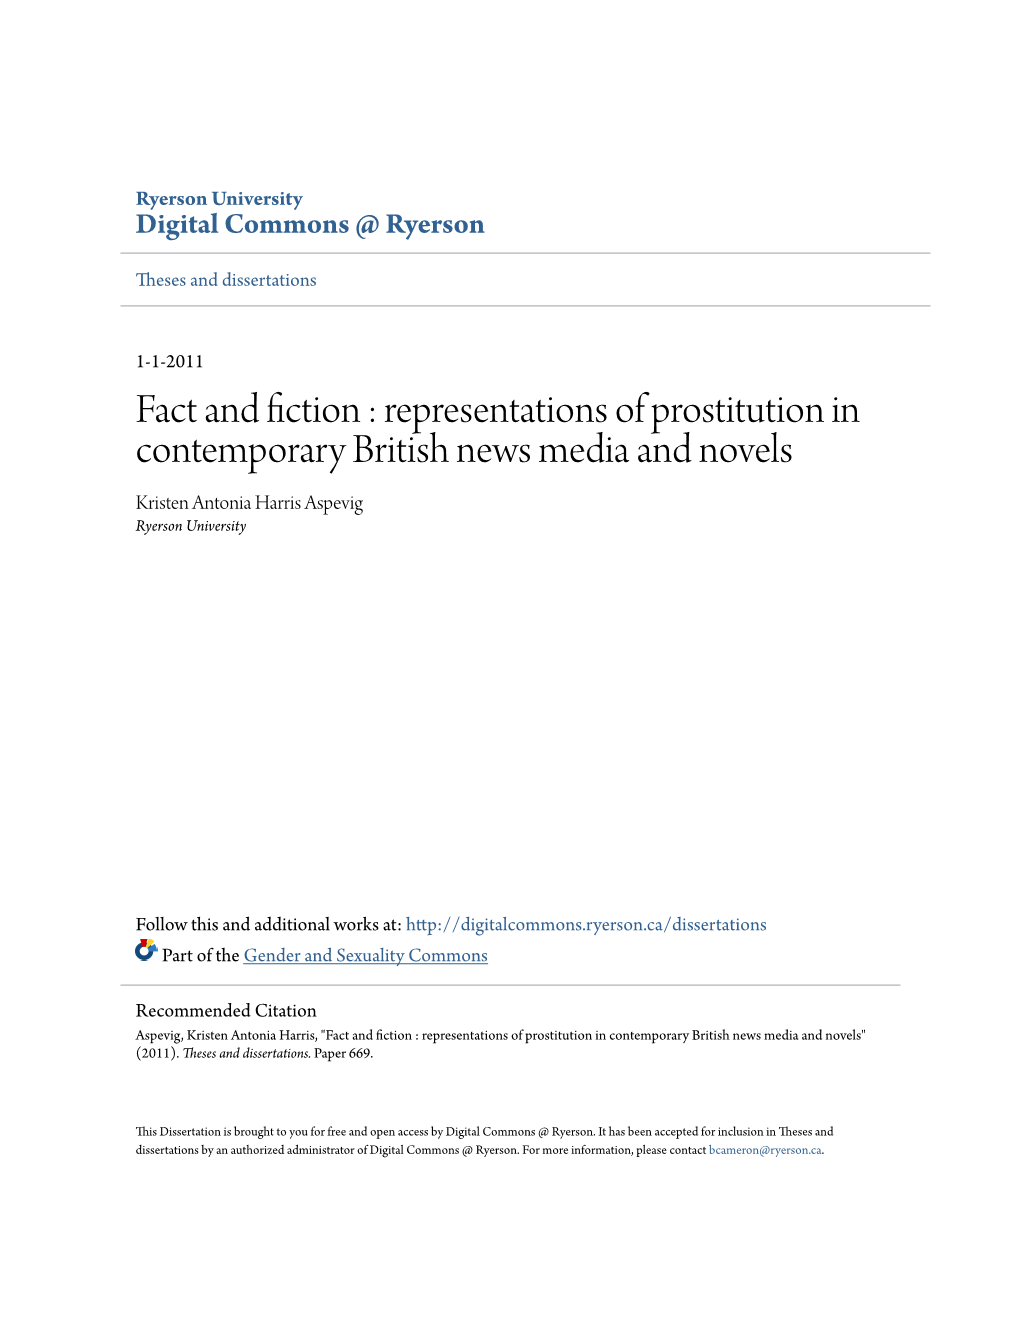 Fact and Fiction : Representations of Prostitution in Contemporary British News Media and Novels Kristen Antonia Harris Aspevig Ryerson University